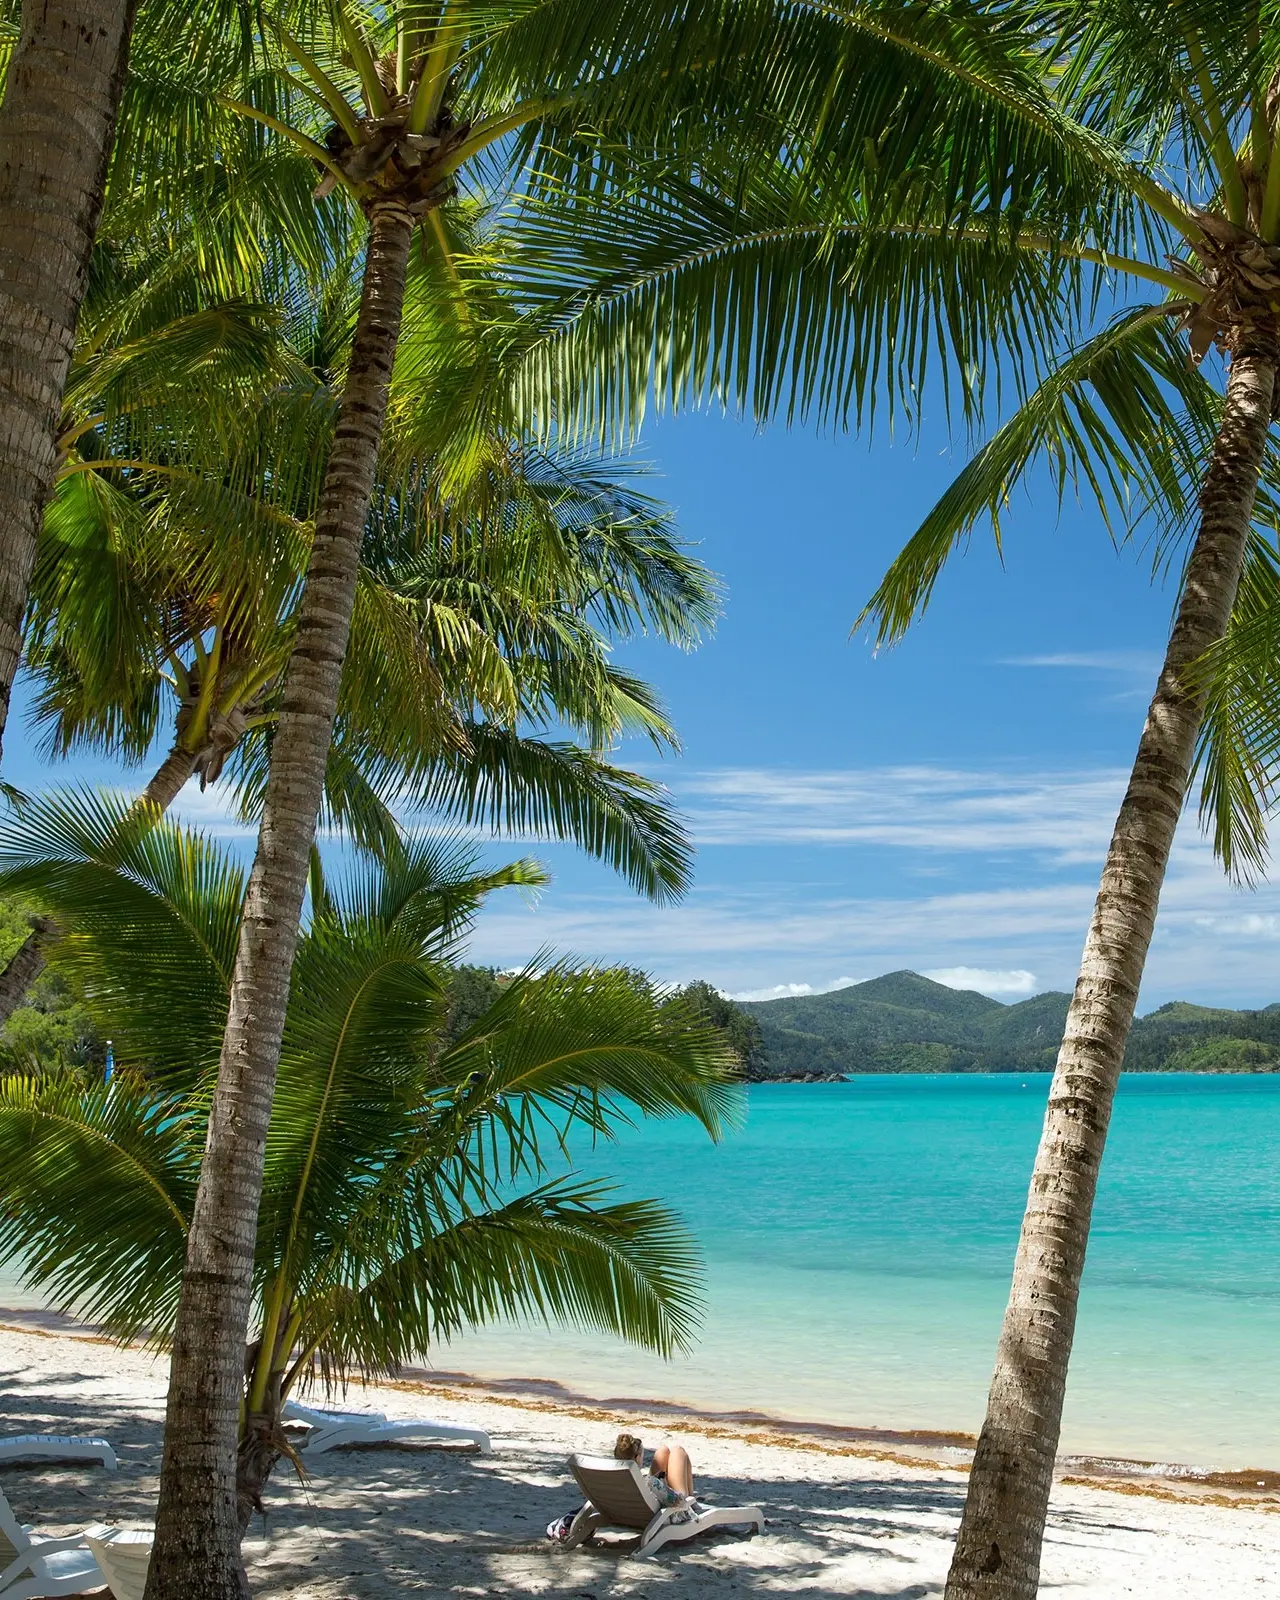 Person on sun-lounger on white sand beach with palm trees looking out over turquoise water, boats and islands, Hamilton Island, Queensland. Image credit: Shutterstock